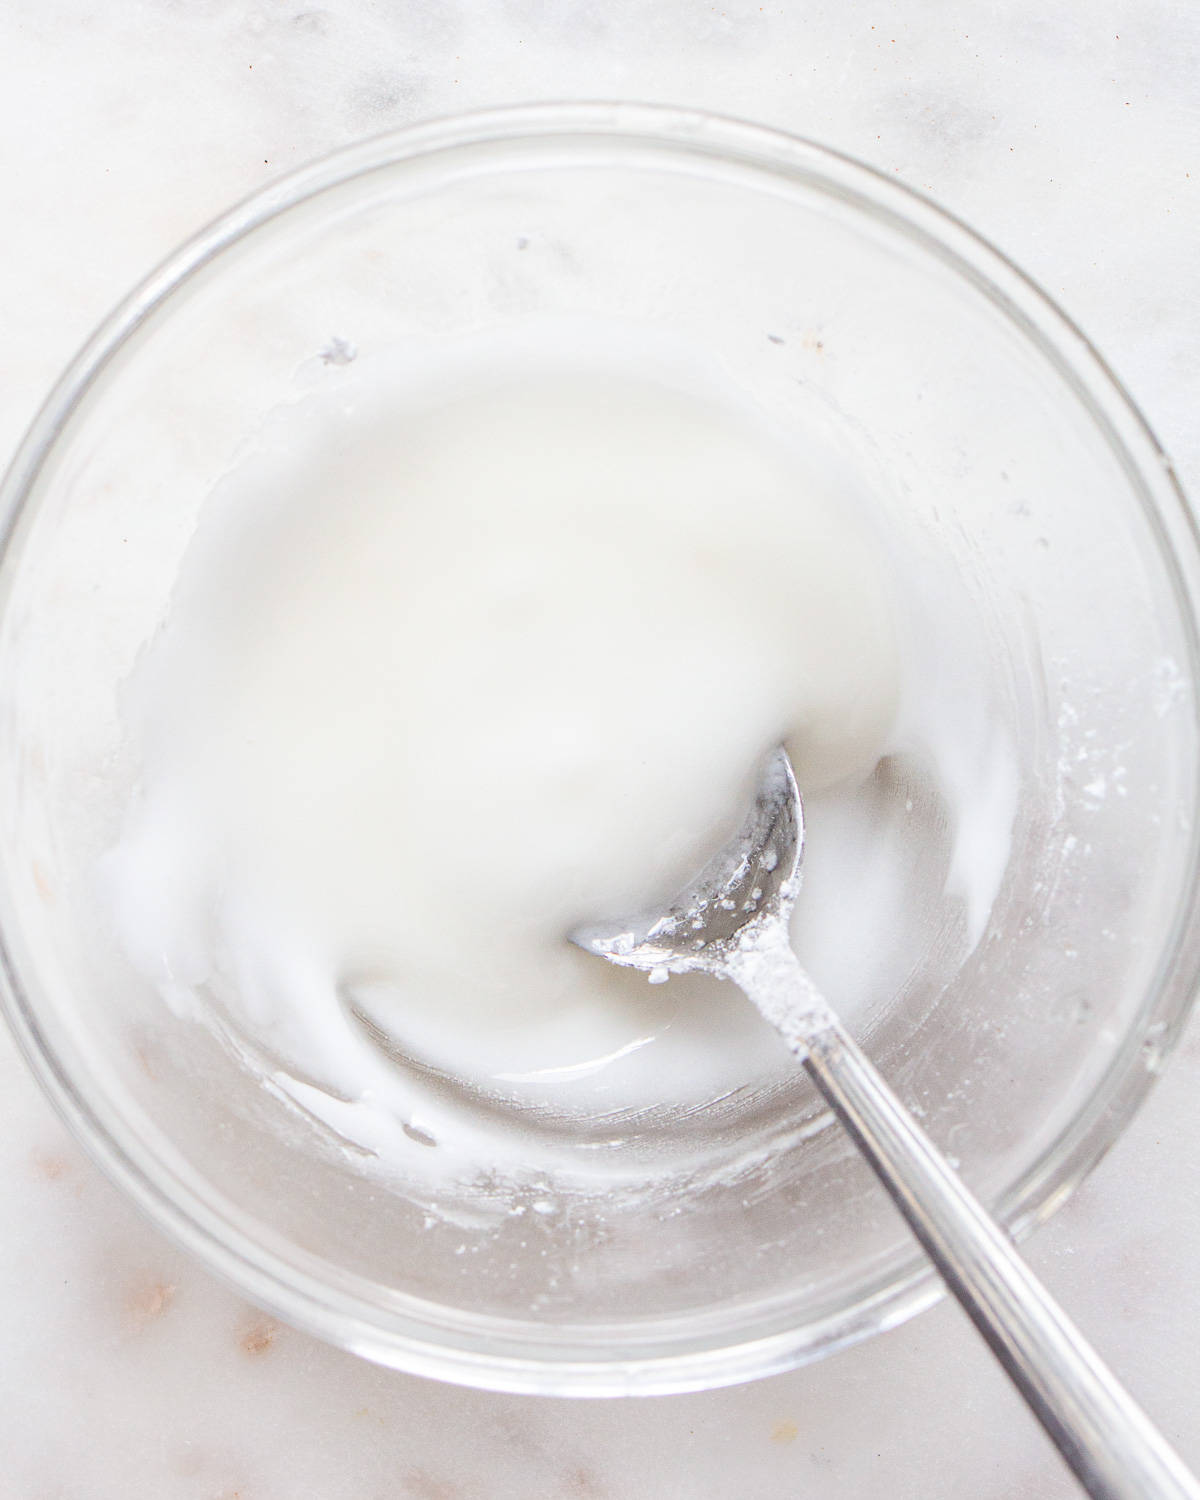 White icing in a small glass bowl with a spoon.